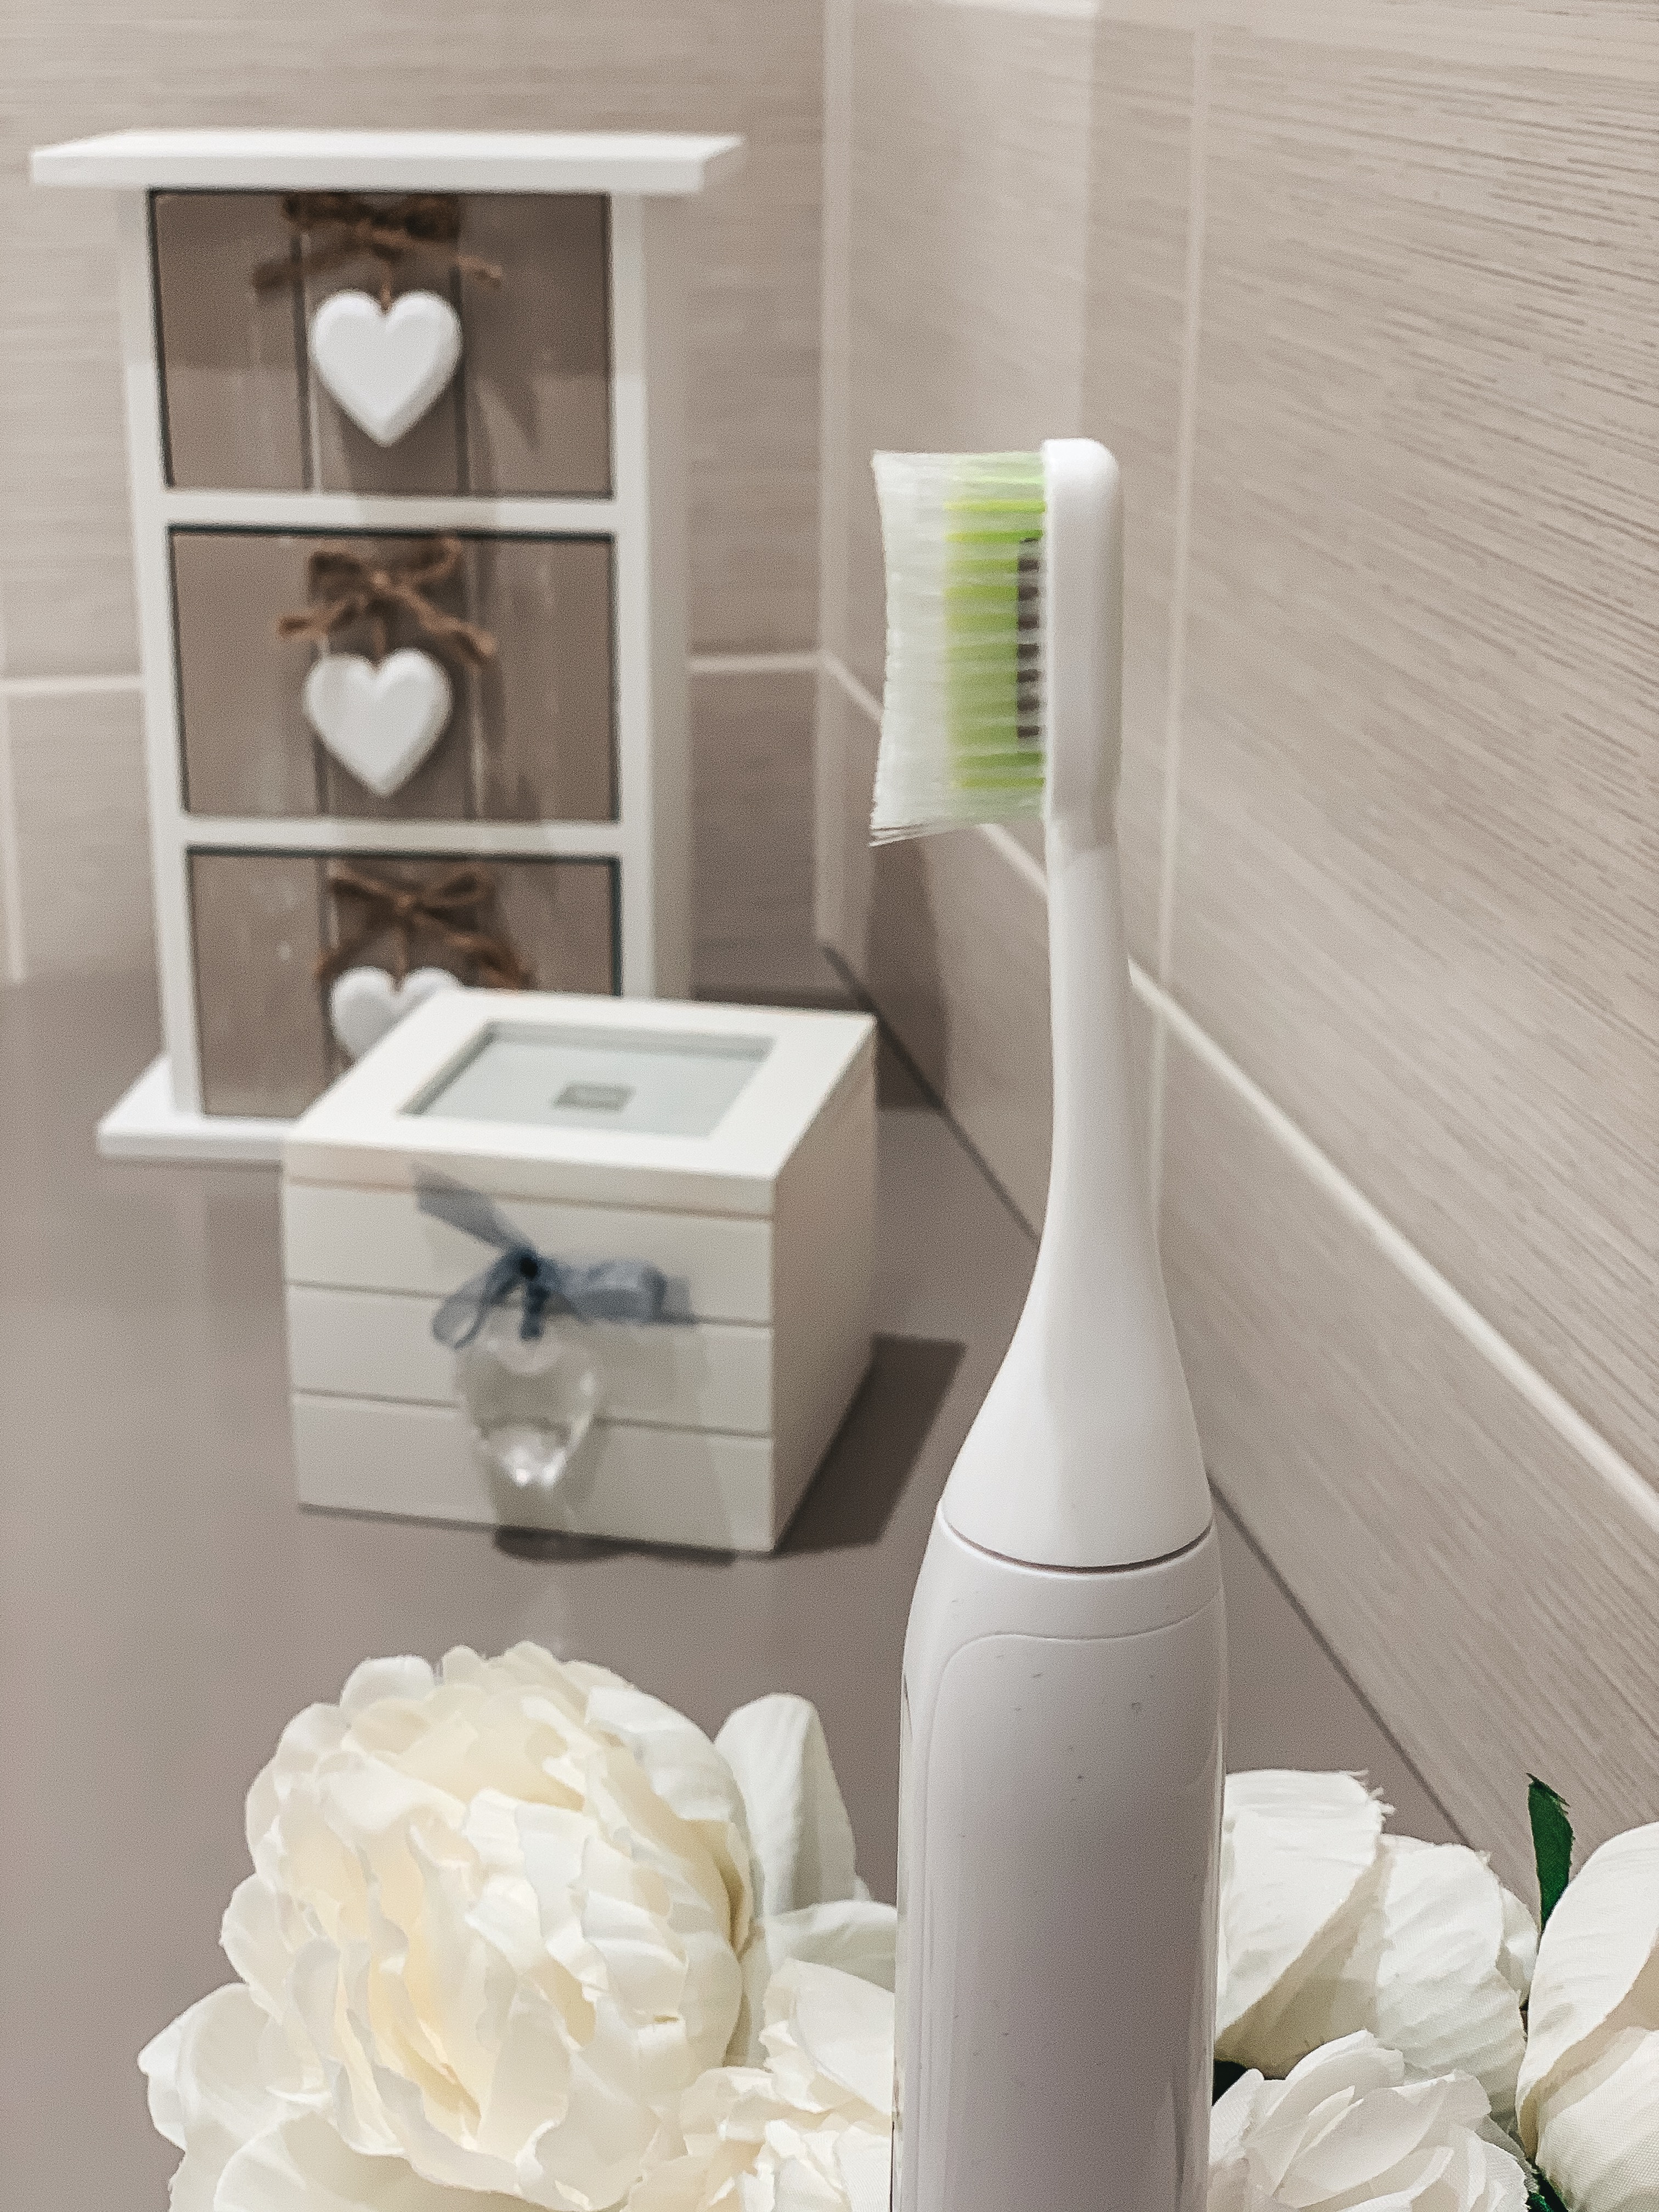 SILK’N TOOTHWAVE: ELECTRIC TOOTHBRUSH WITH DENTALRF™ TECHNOLOGY